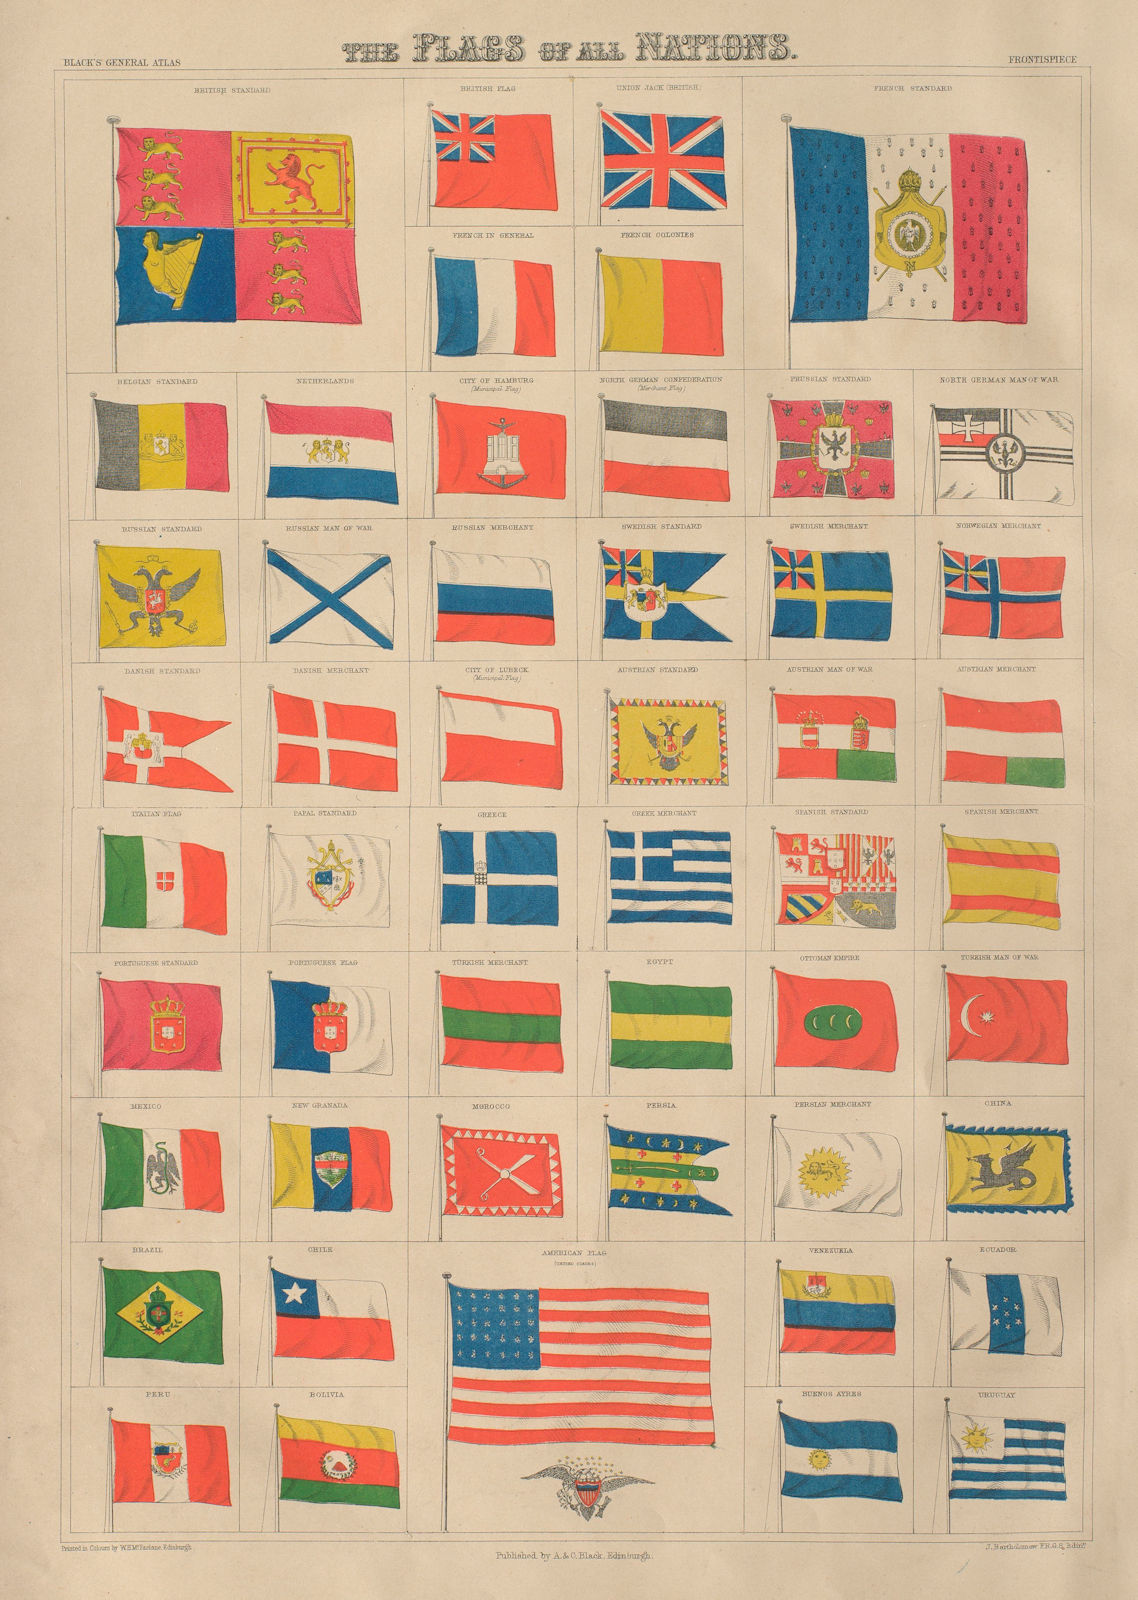 Associate Product Flags of all Nations Standards merchants Ottoman Persia Lubeck China Brazil 1870